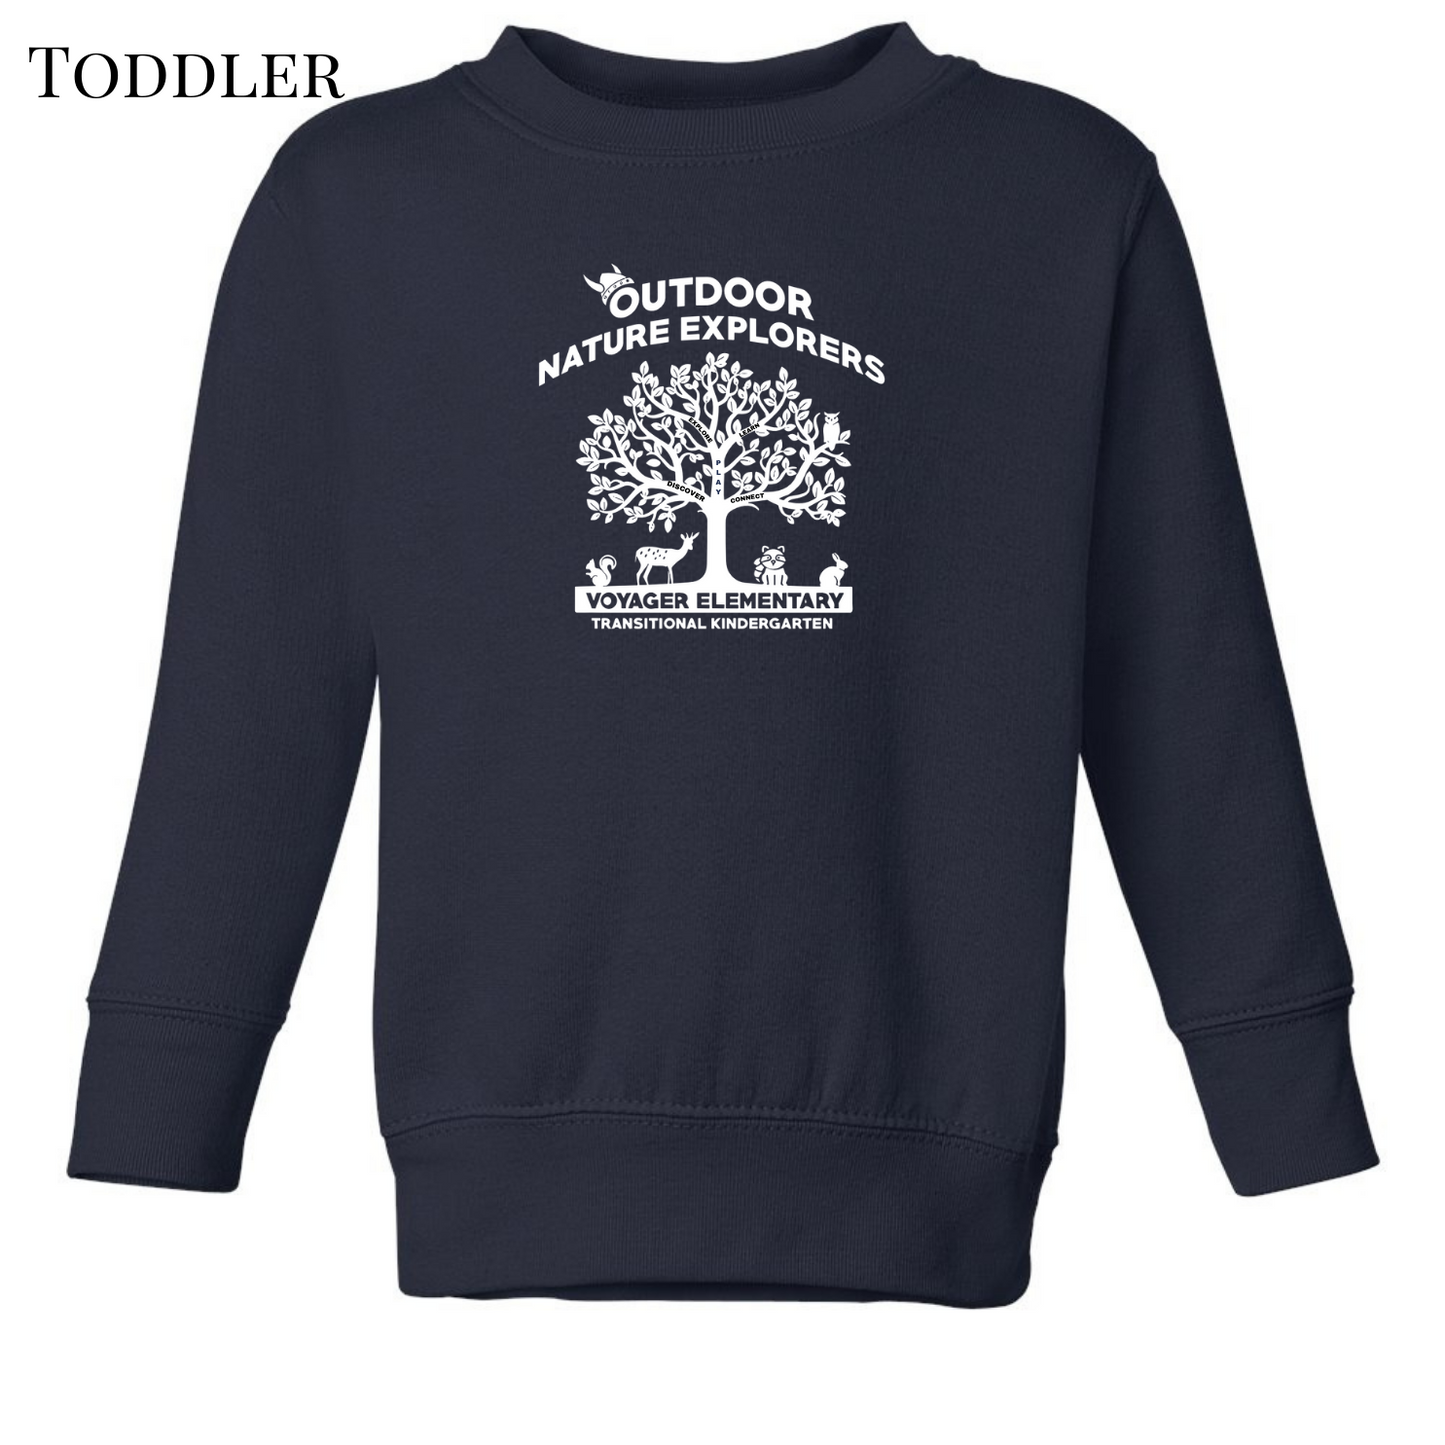 Outdoor Nature Explorers Voyager-Long Sleeve Tee  Adult and Toddler Sizing